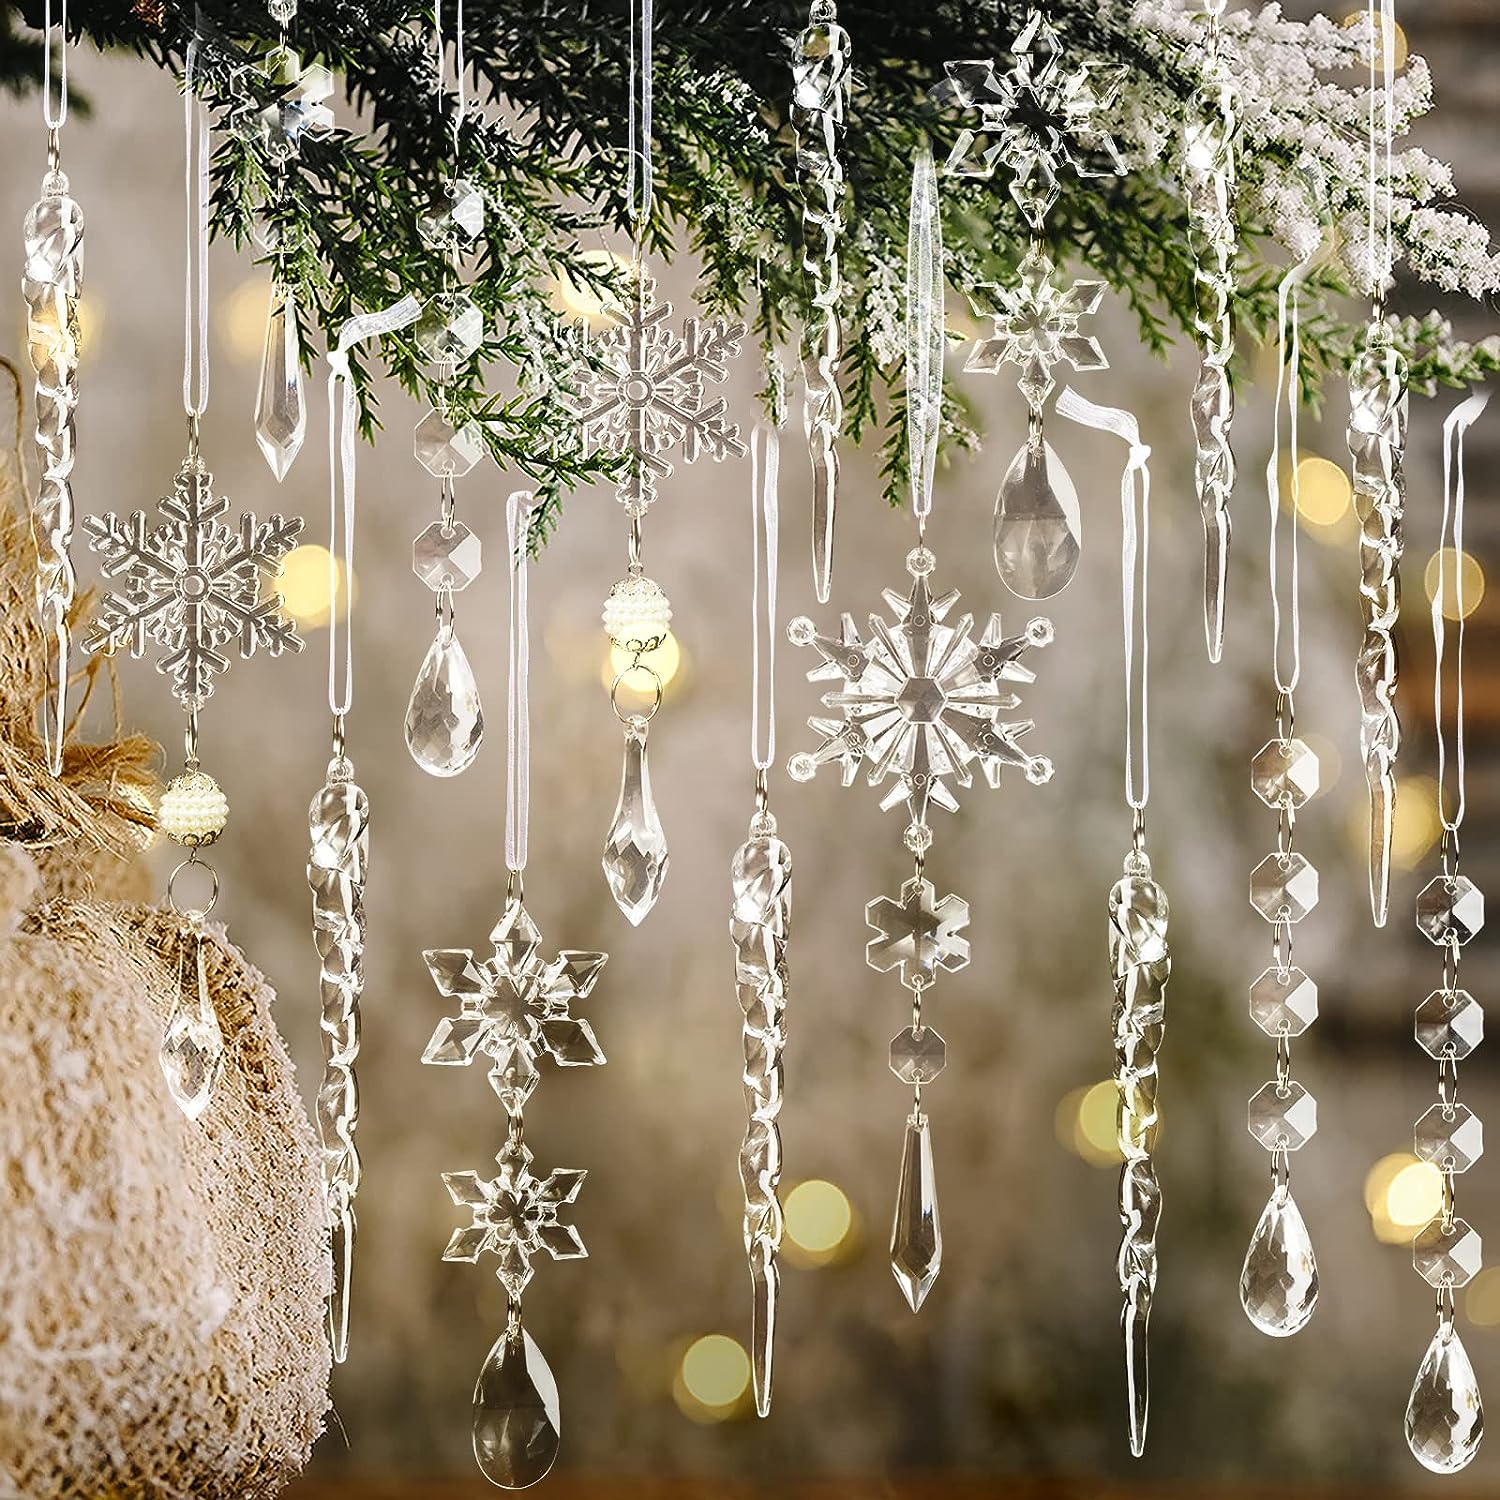 Crystal Garland Lights Winter Ornaments For Christmas Tree